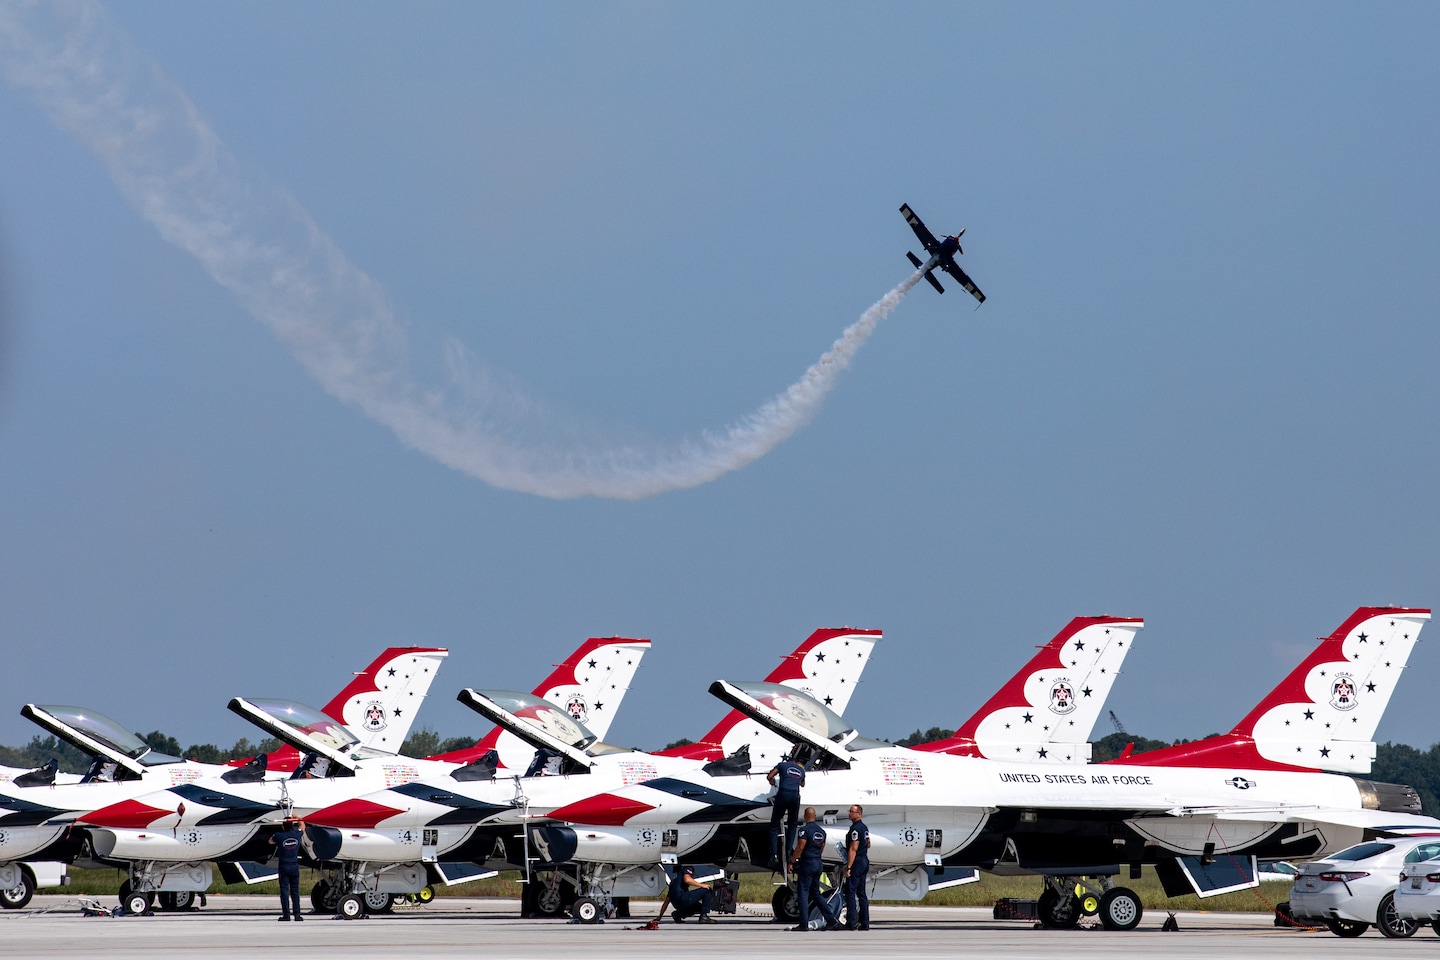 Joint Base Andrews Air Show 2022 The latest updates and what to know